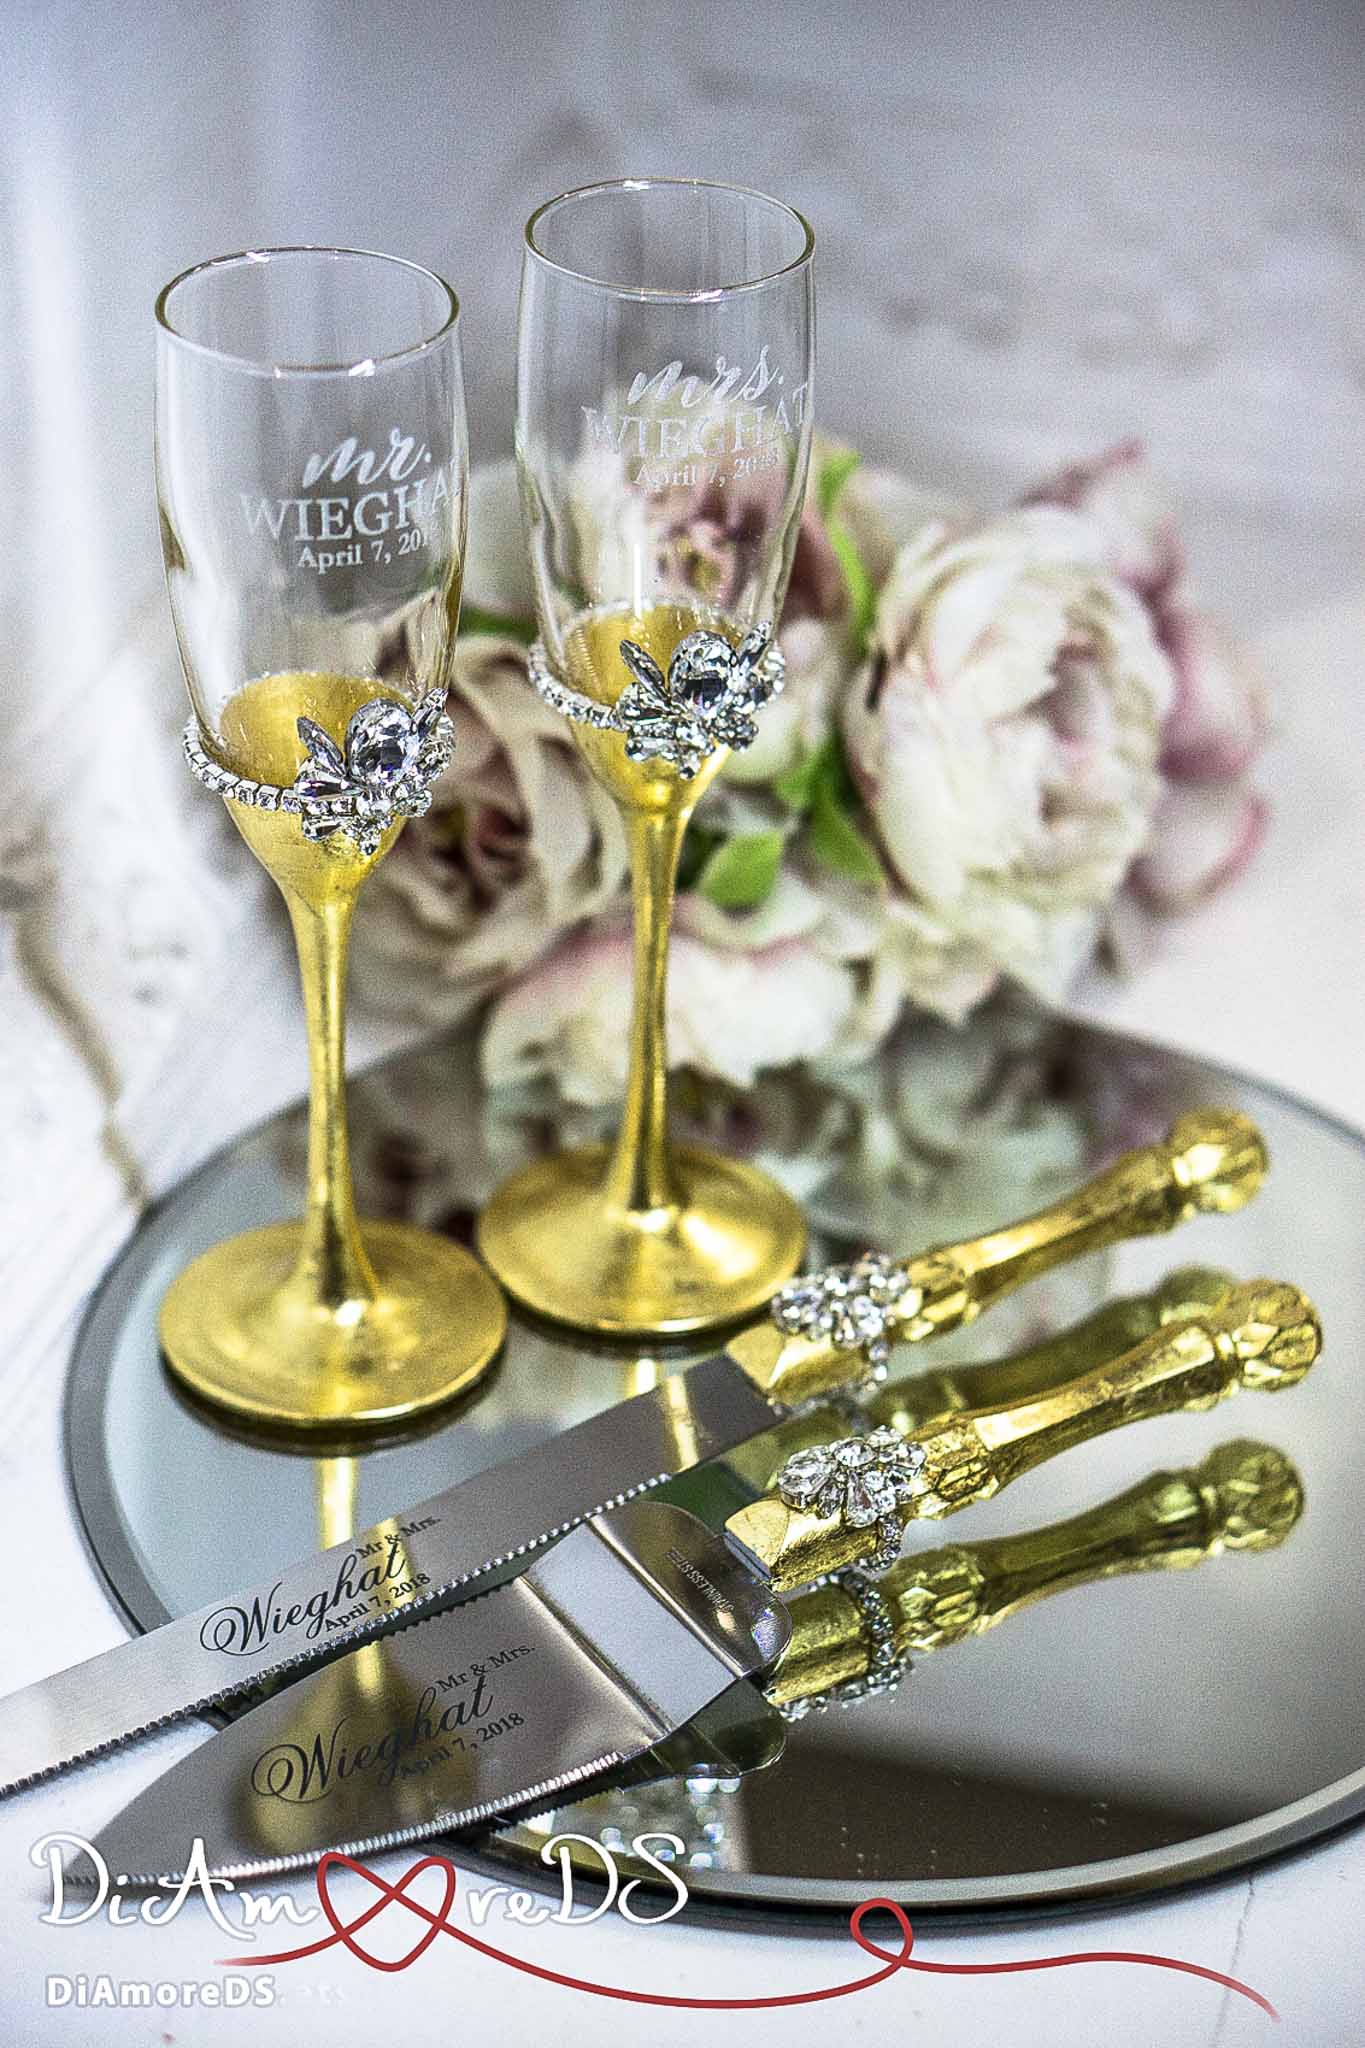 Gold and silver wedding cake knife and champagne glasses set